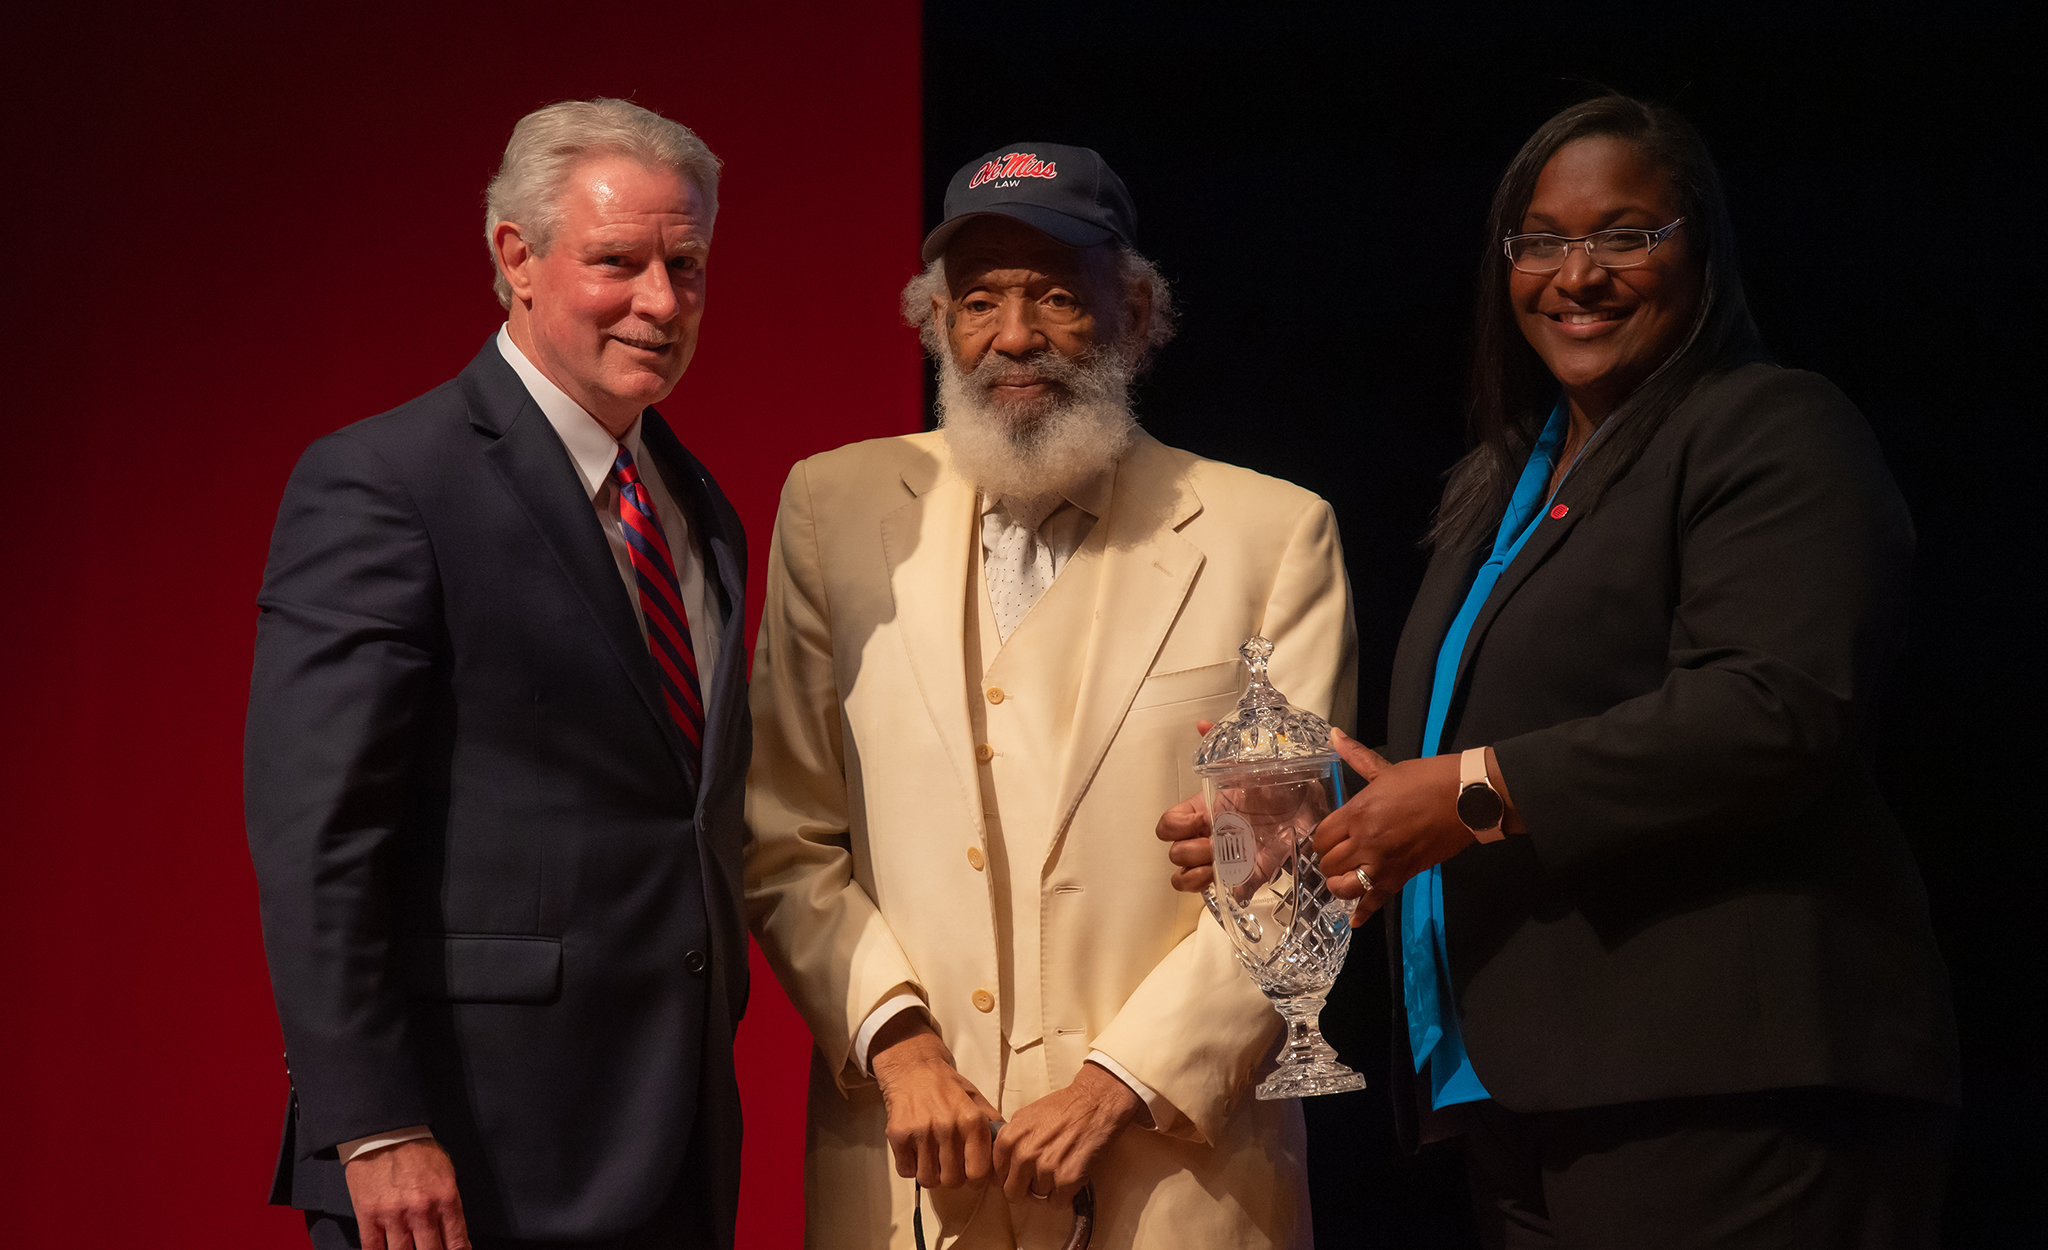 Chancellor Glenn Boyce (left) and Shawnboda Mead (right), vice chancellor for diversity and community engagement, present James Meredith with the Mississippi Humanitarian Award. The honor is one of the university’s most distinguished awards. Photo by Kevin Bain/Ole Miss Digital Imaging Services